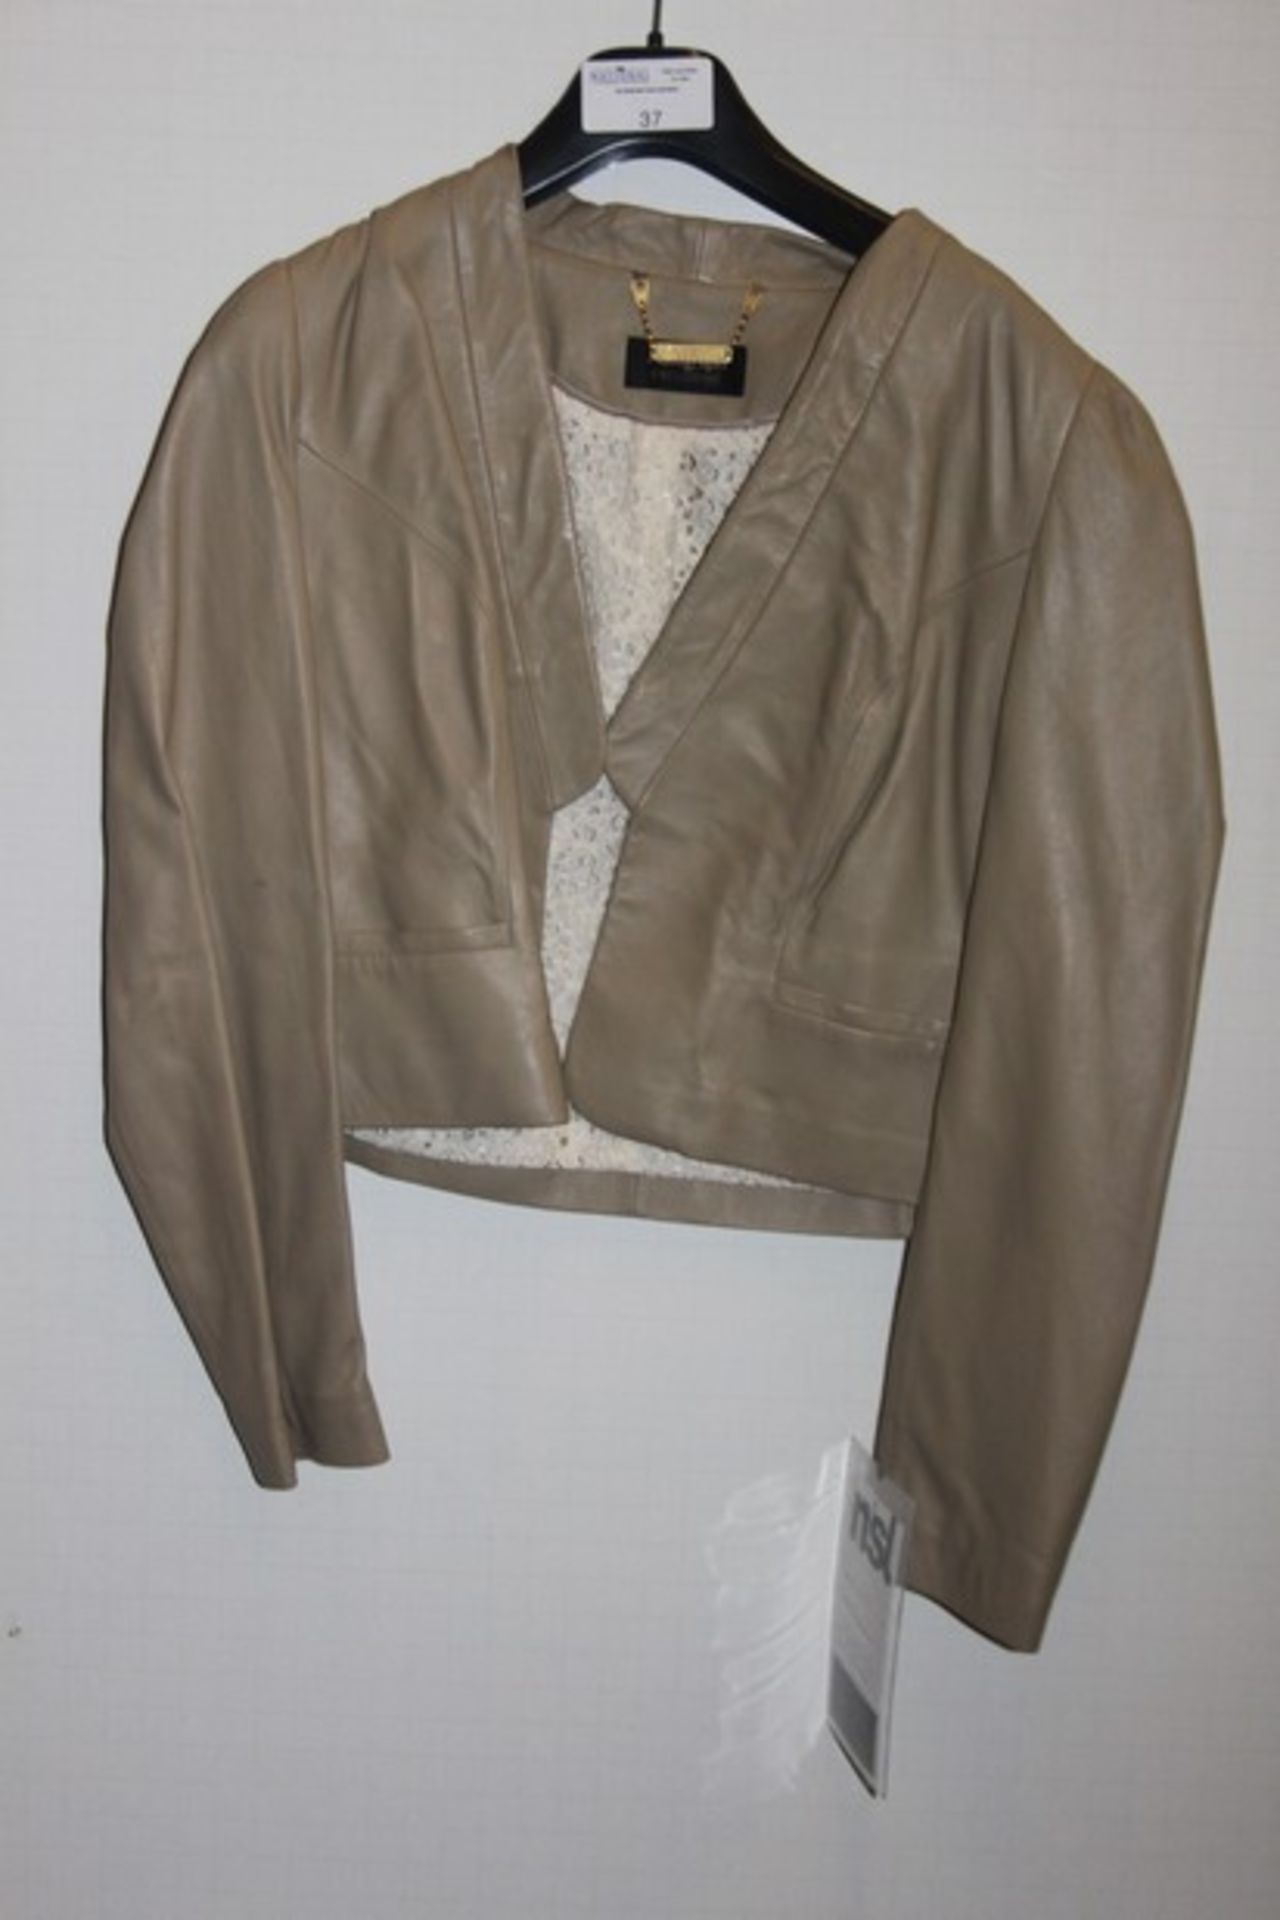 BRAND NEW LADIES LEATHER JACKET BY AUTOGRAPH SIZE 18  RRP £70.00